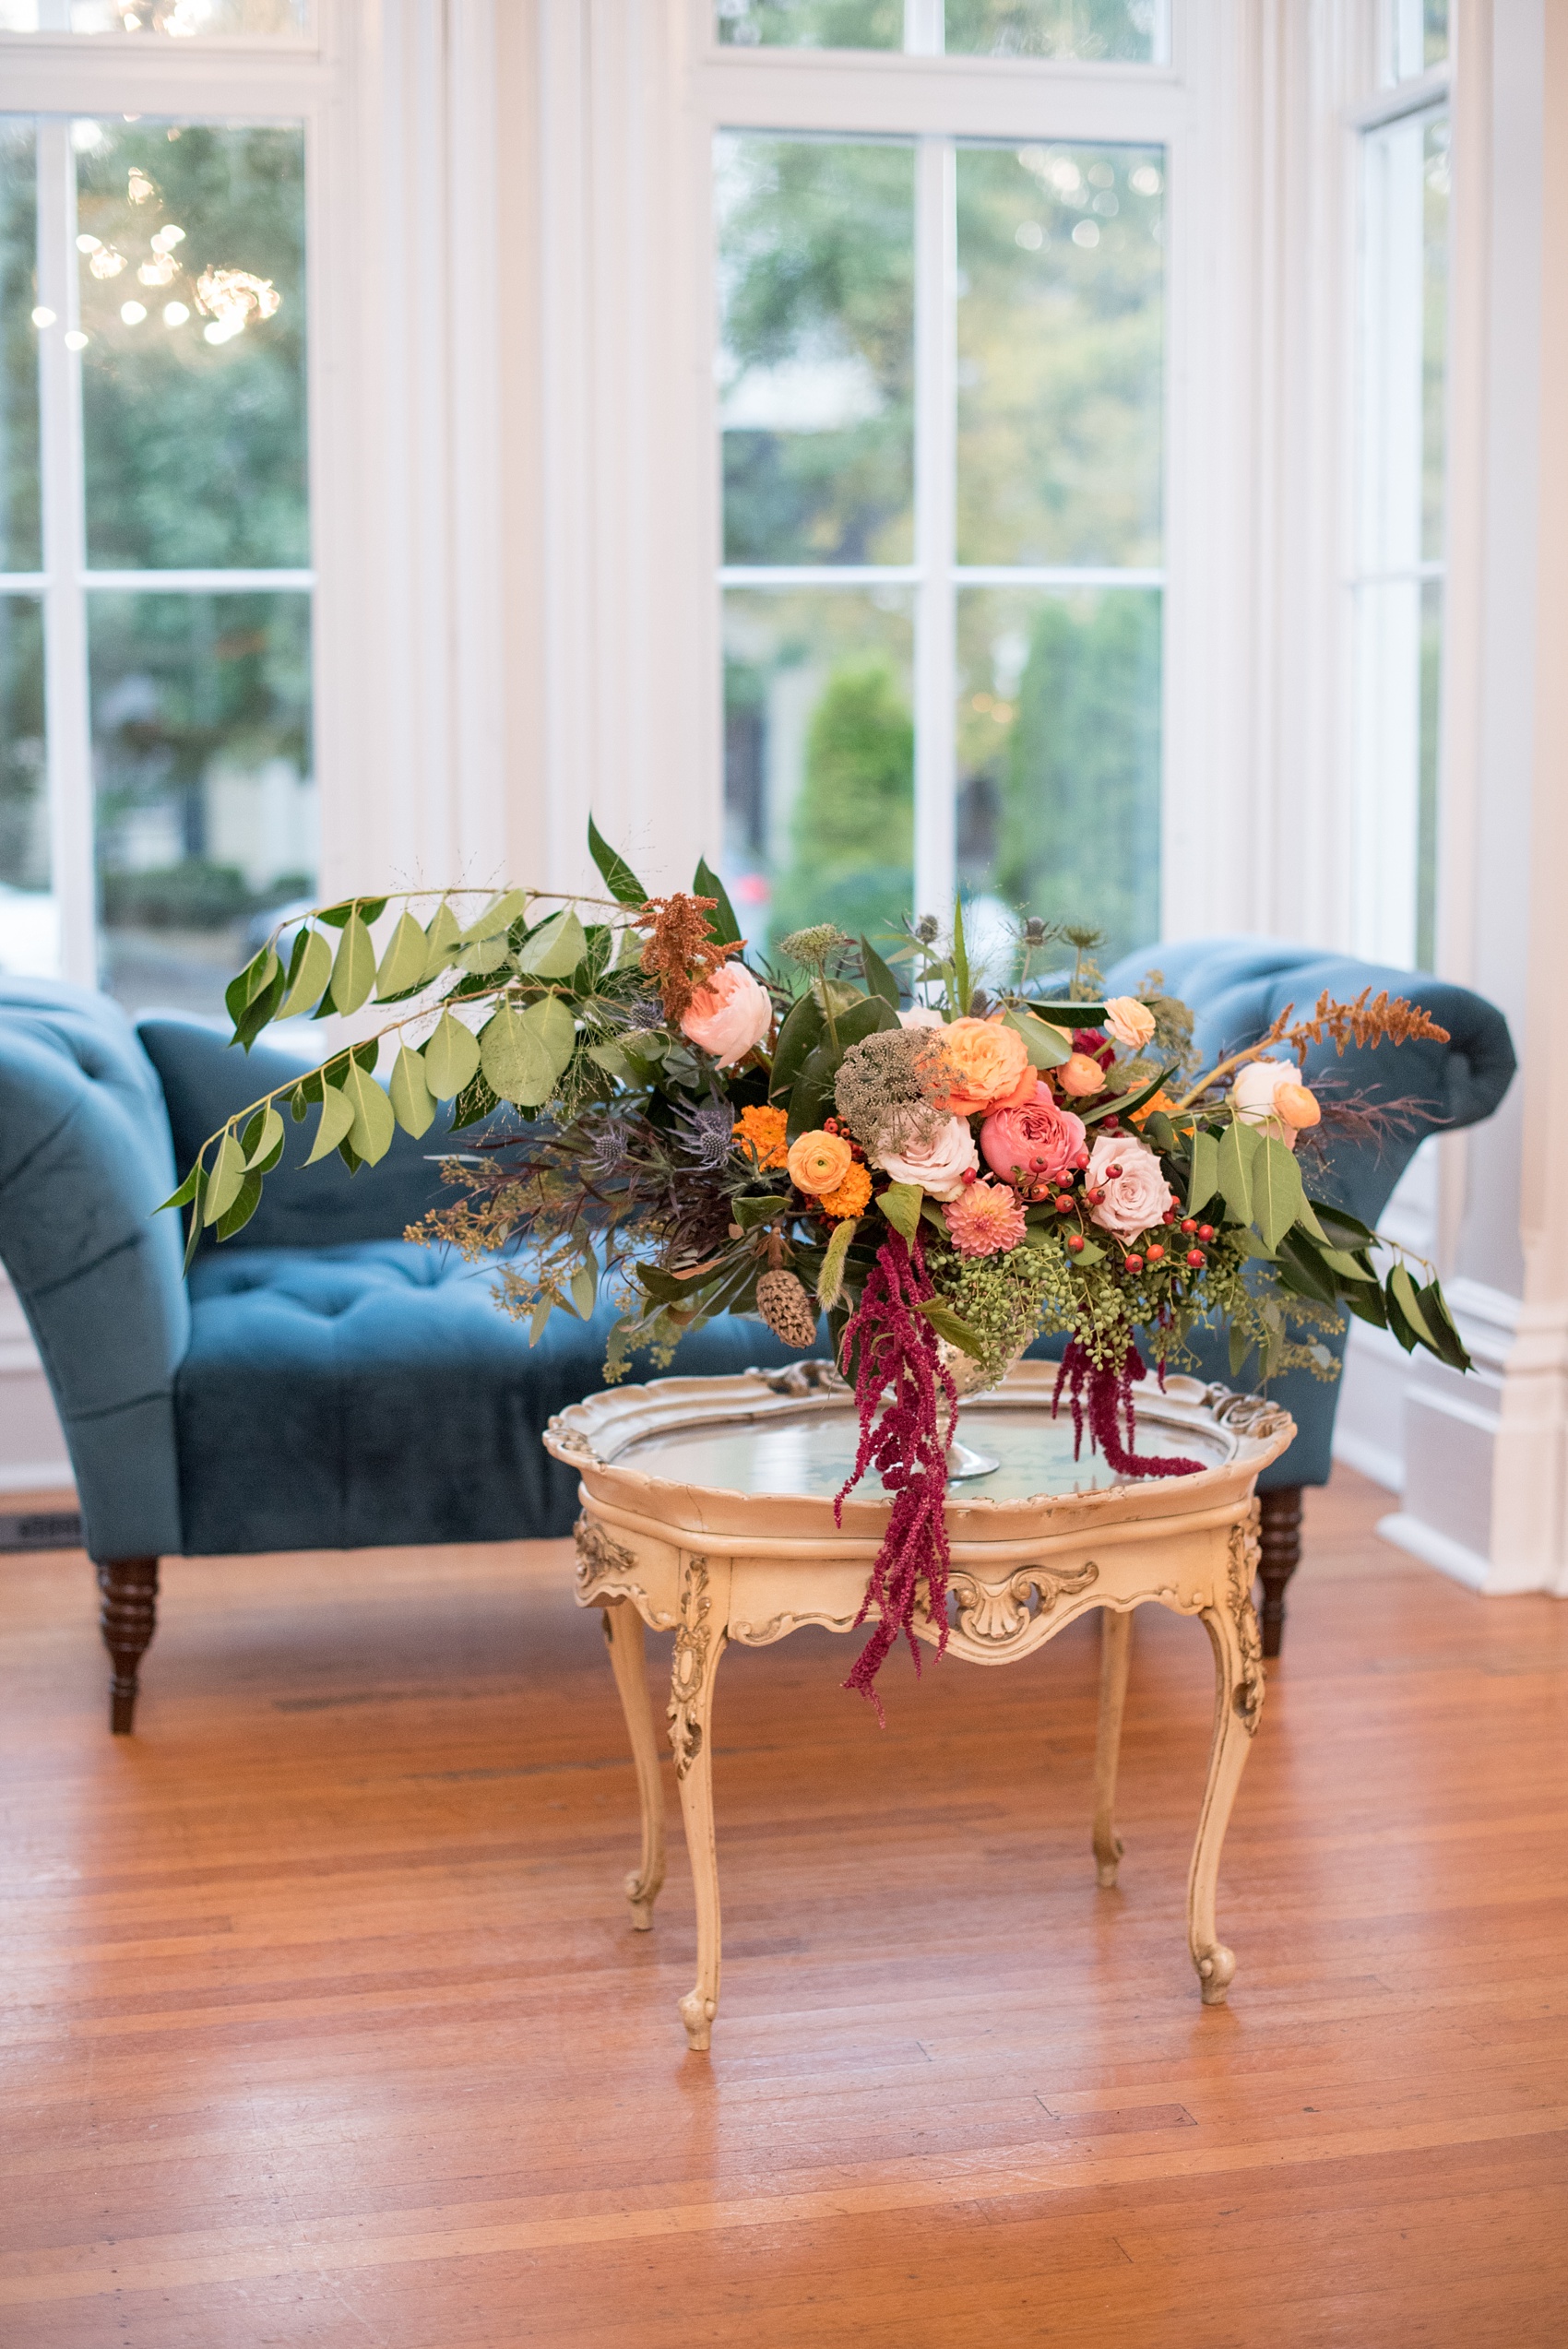 Mikkel Paige Photography photos from a Merrimon-Wynne House wedding in Raleigh. Meristem Floral created several fall colored centerpieces for a same-sex celebration.